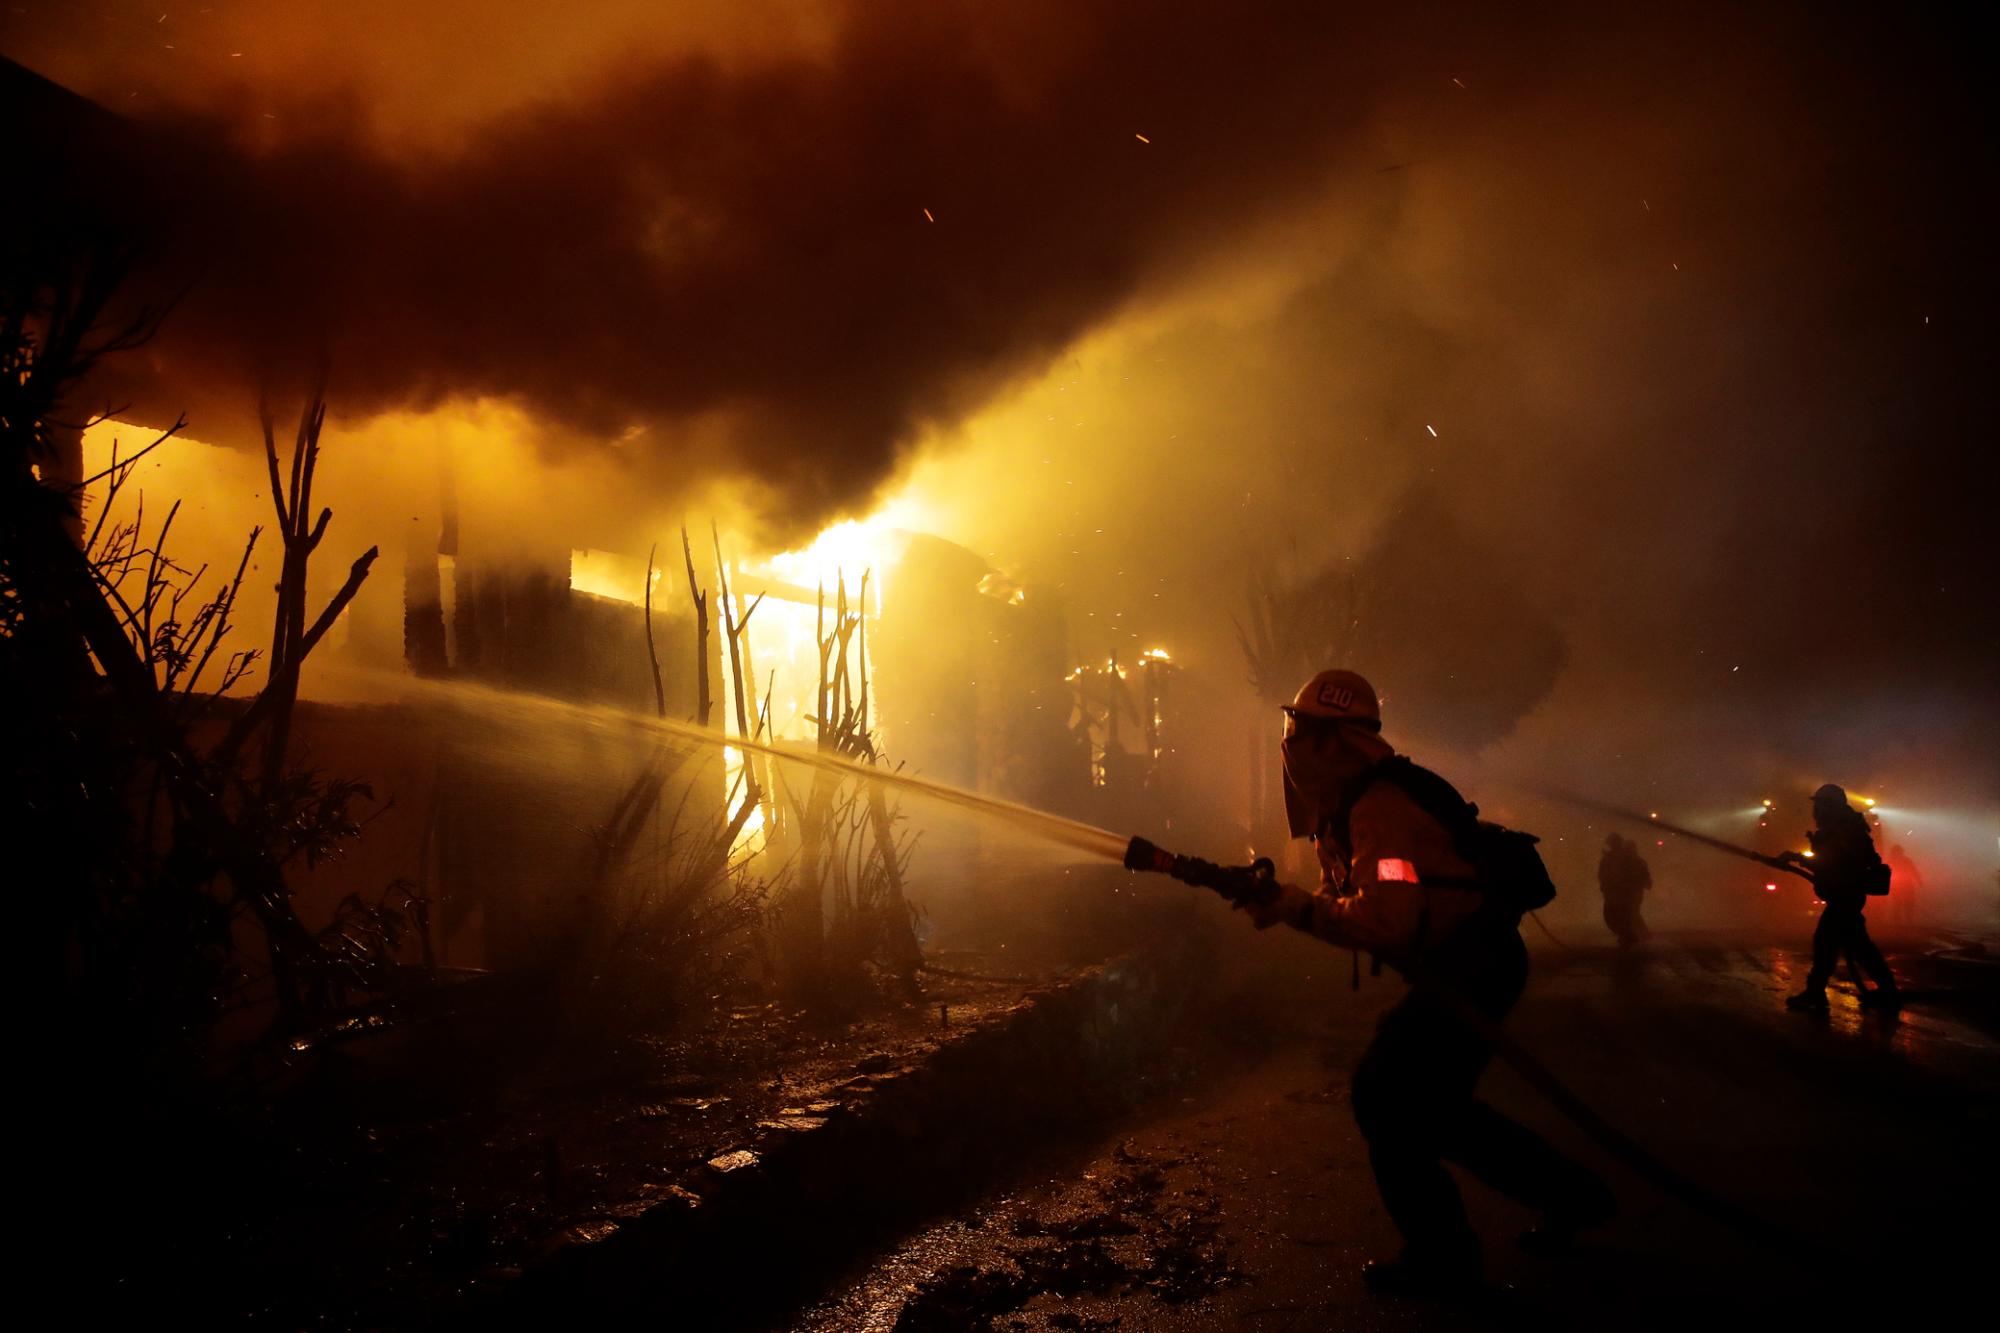 Firefighters try to hose down flames as homes burn in the Getty fire area along Tigertail Road, Monday, Oct. 28, 2019, in Los Angeles.